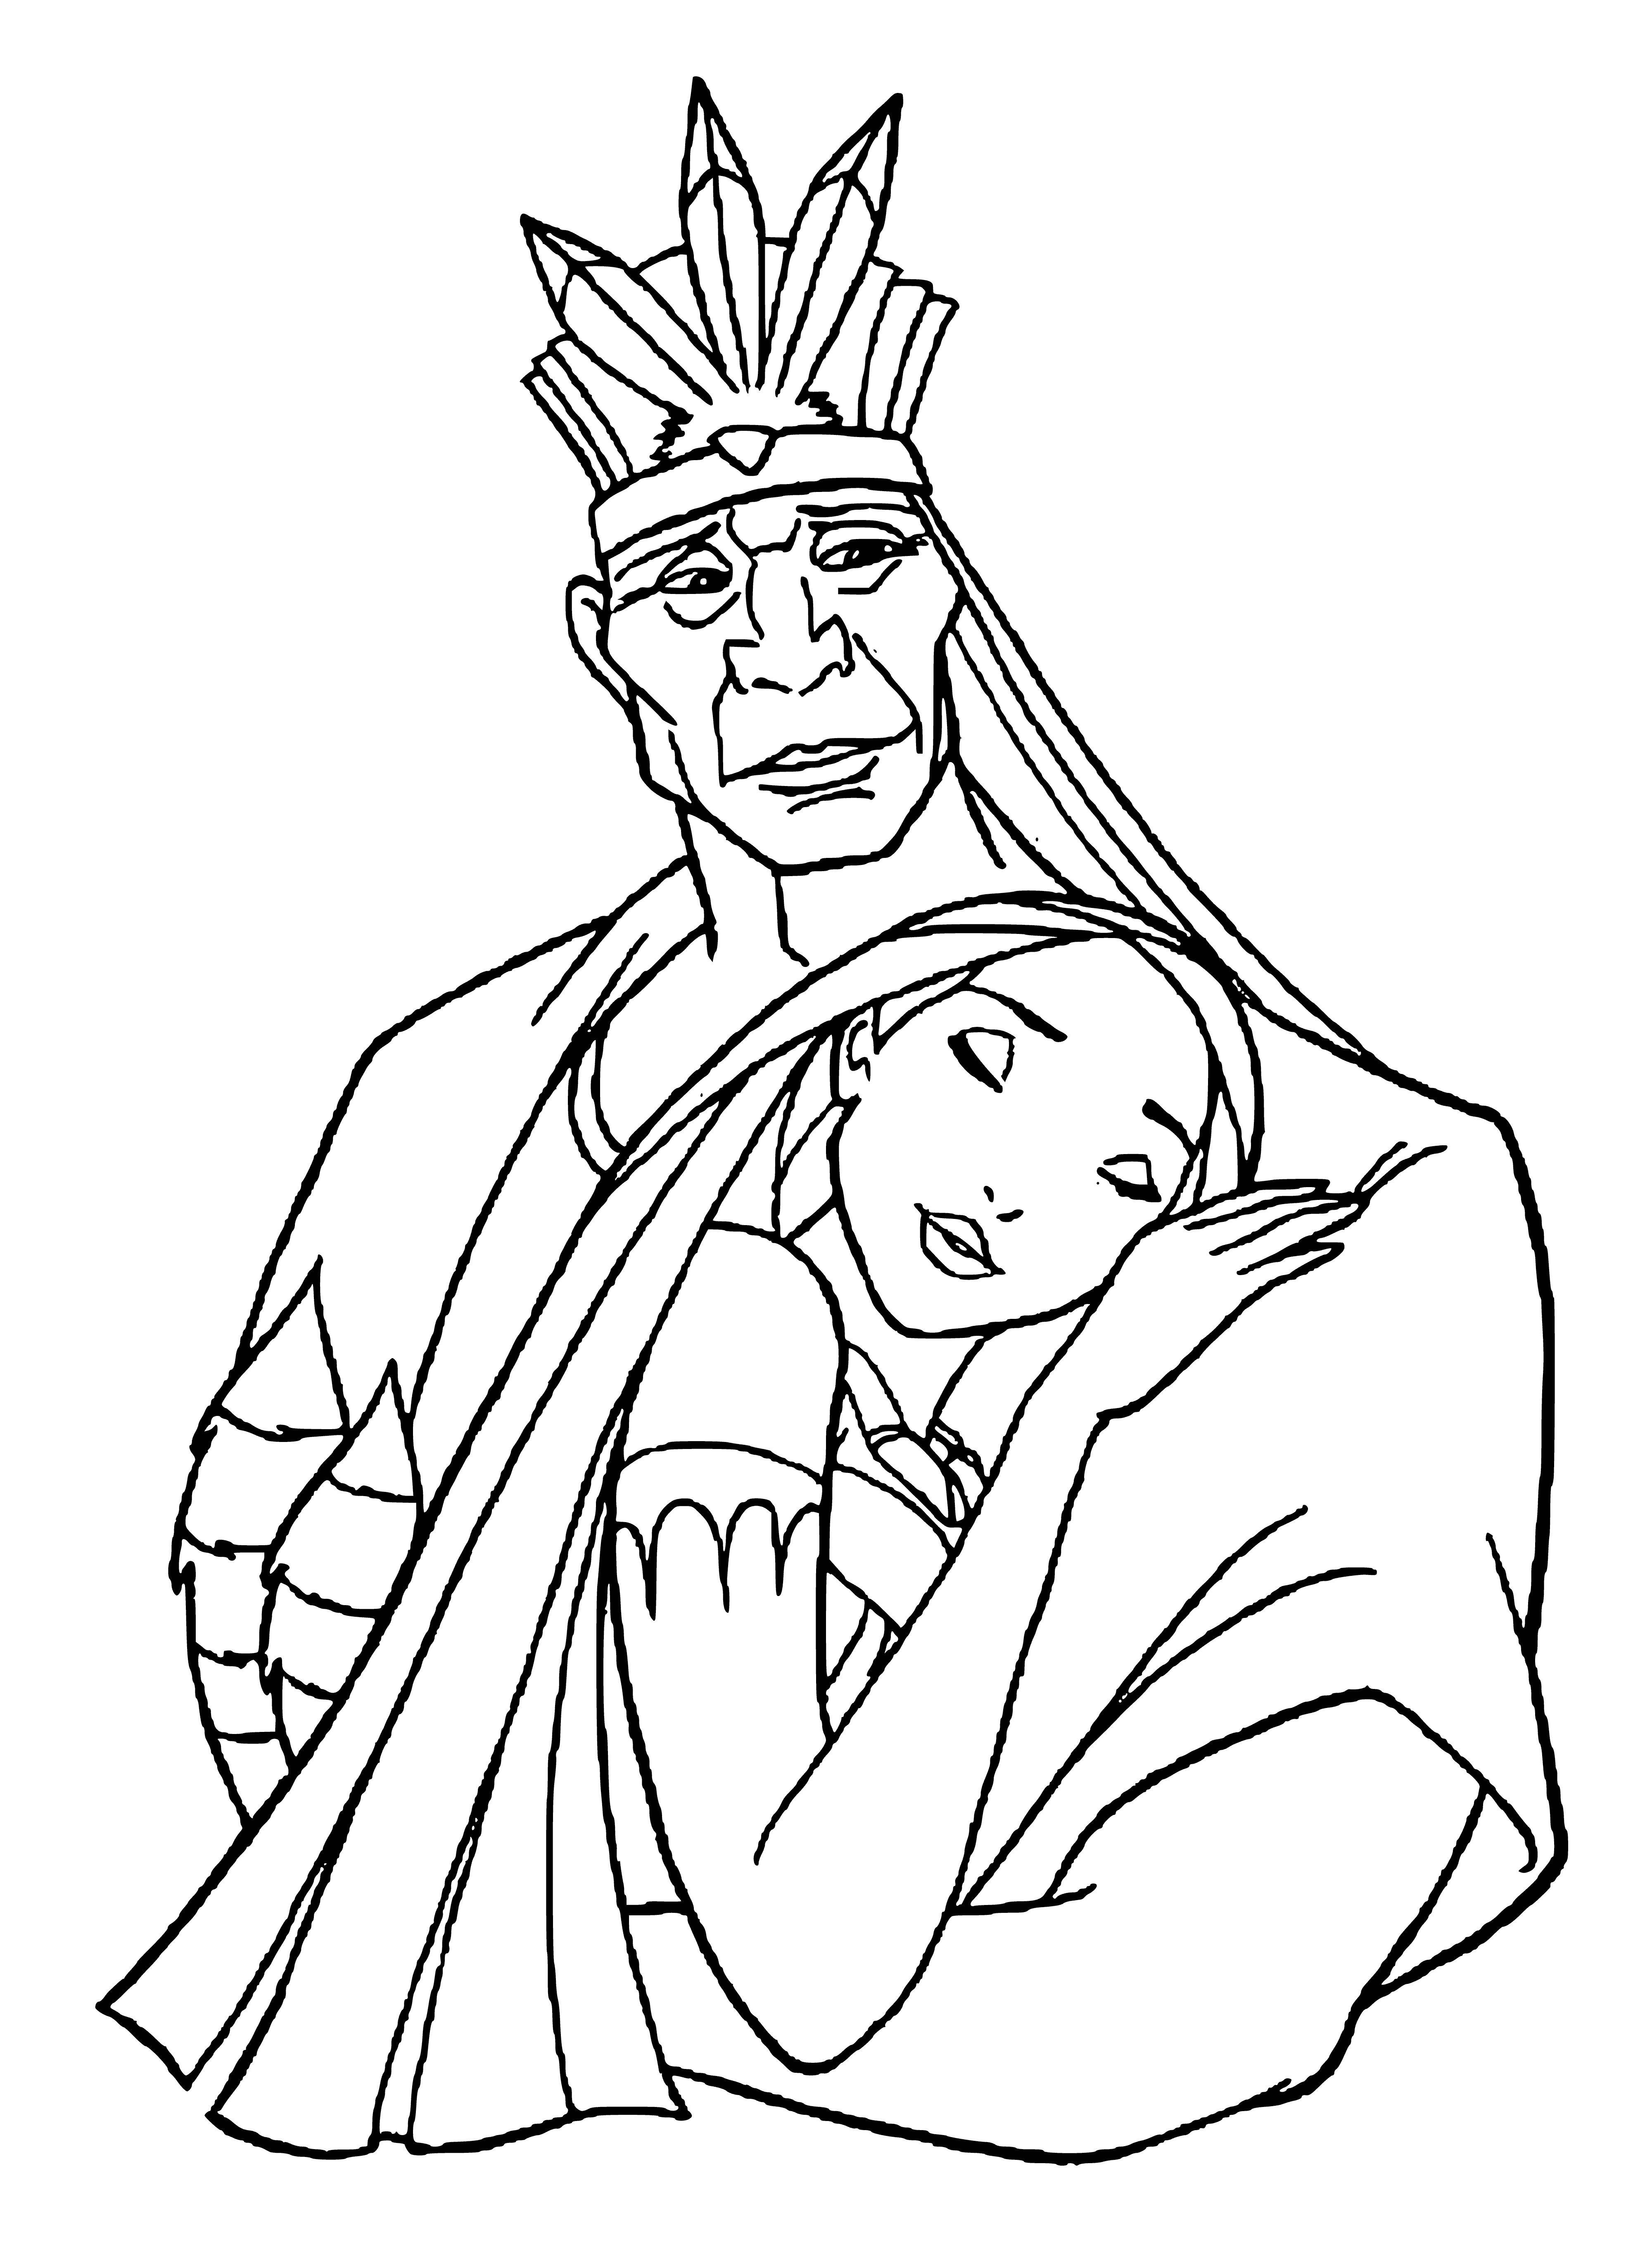 coloring page: Father & daughter Pocahontas embrace, watching the sunset together.